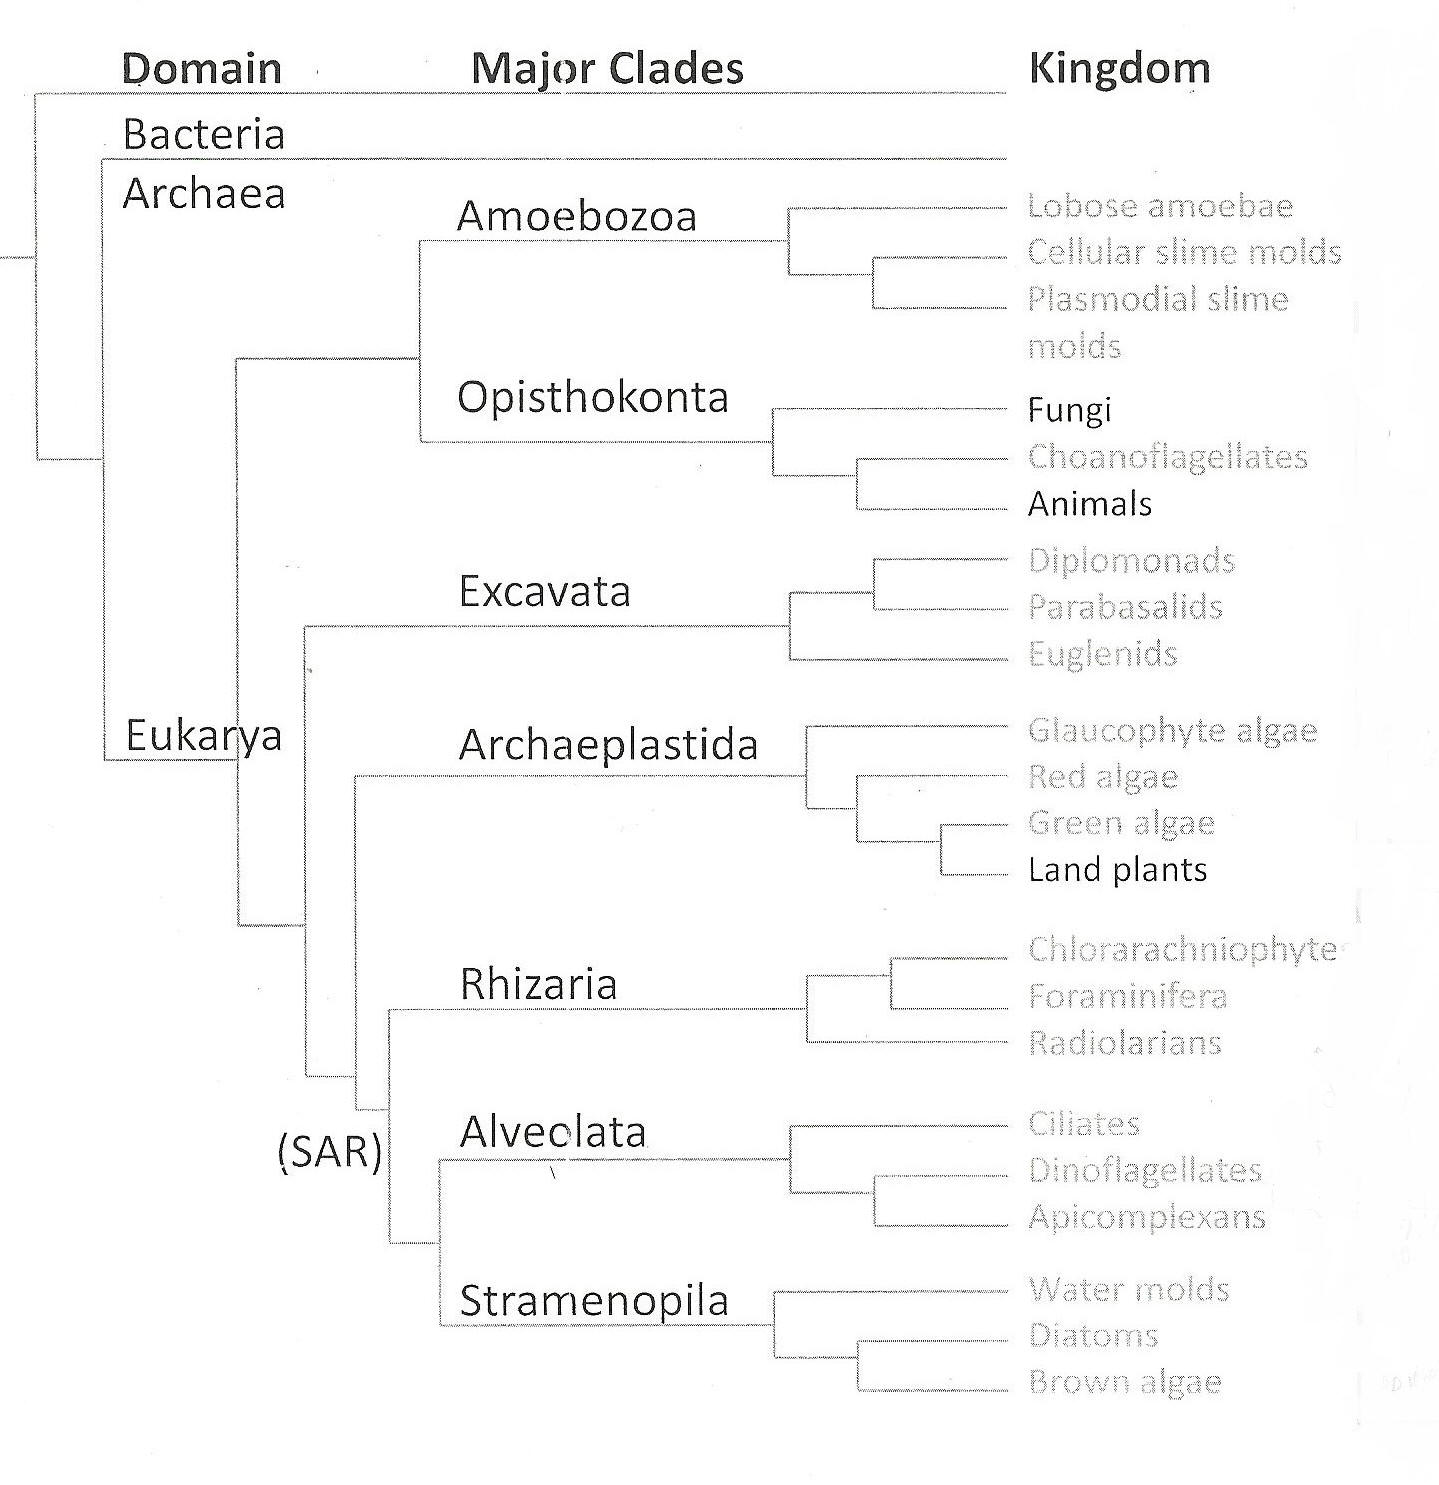 Phylogenetic tree courtesy of BIO 203 lecture materials. Used with permission.